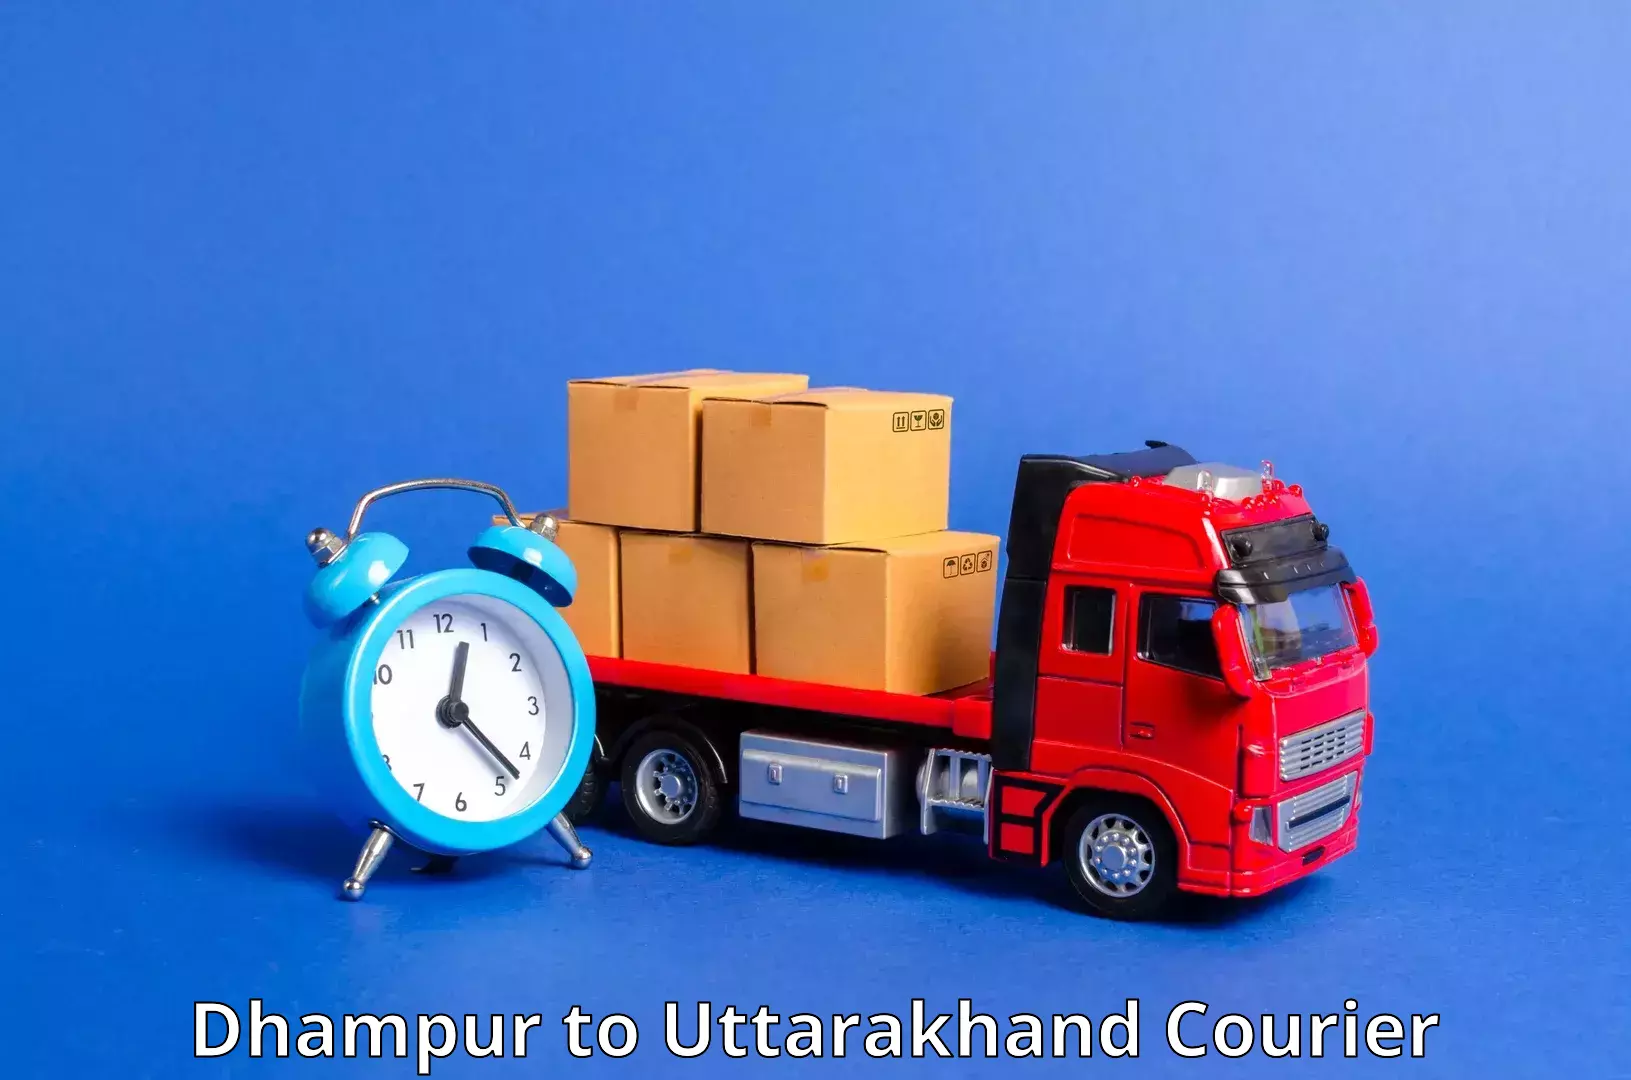 Courier service comparison Dhampur to Roorkee